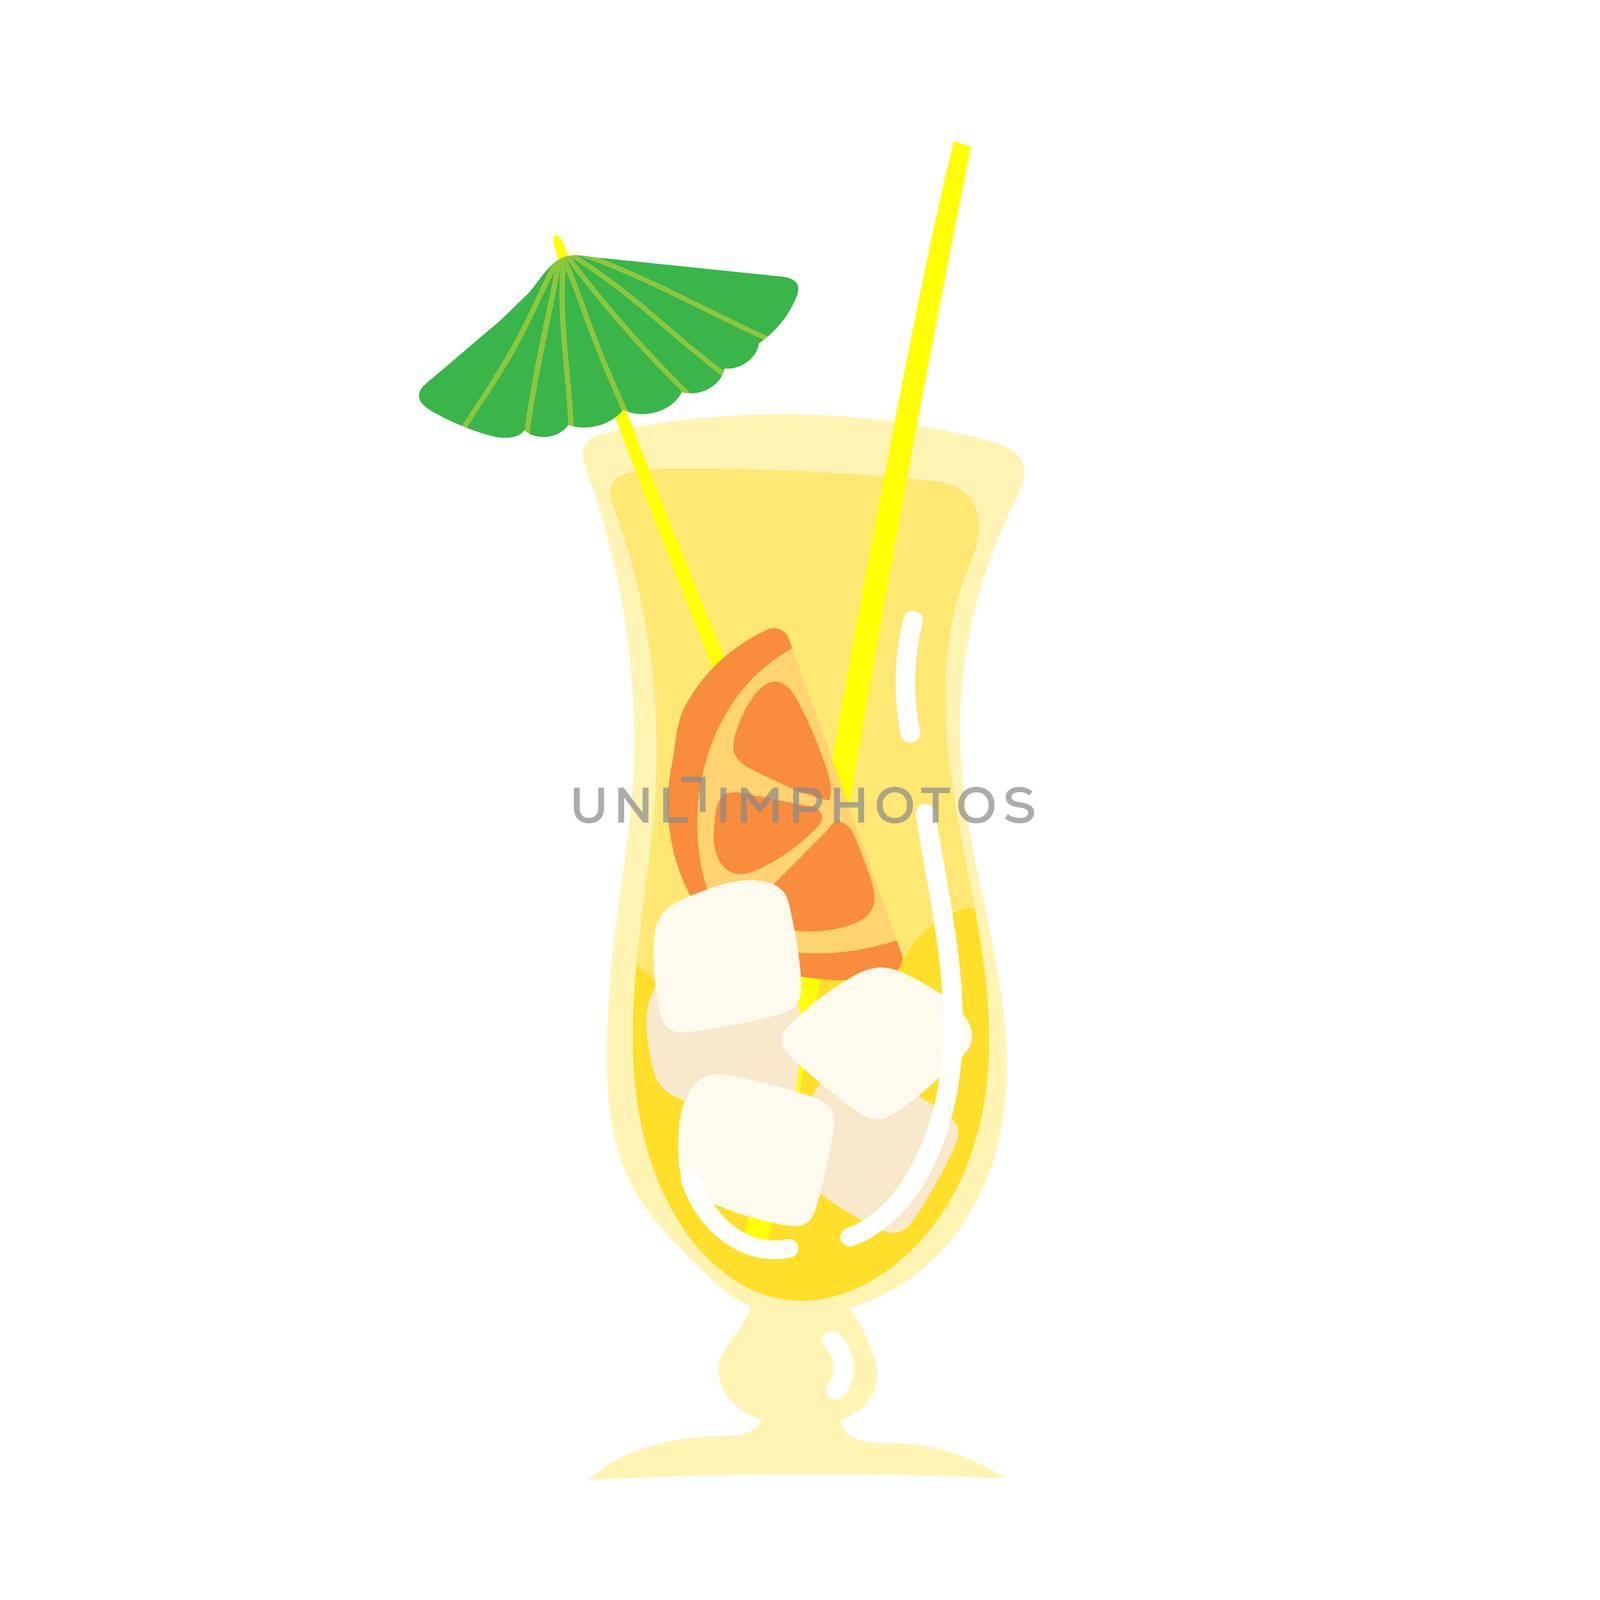 Cocktail icon. Cocktail glass with drink icon for menu. Simple hand drawn logotype template. Vector illustration. Summer drink with umbrella